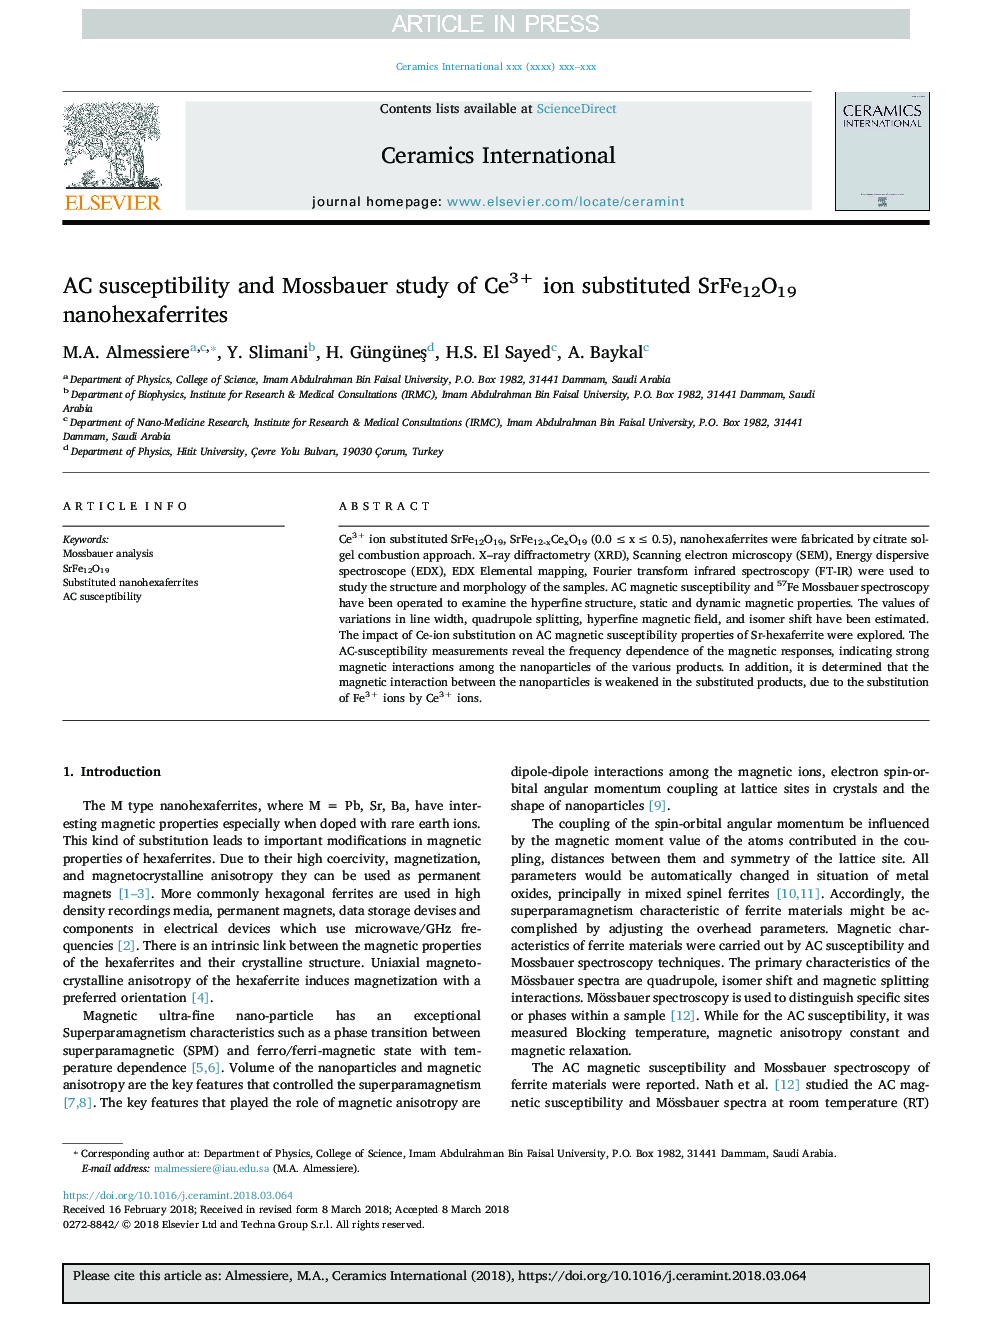 AC susceptibility and Mossbauer study of Ce3+ ion substituted SrFe12O19 nanohexaferrites